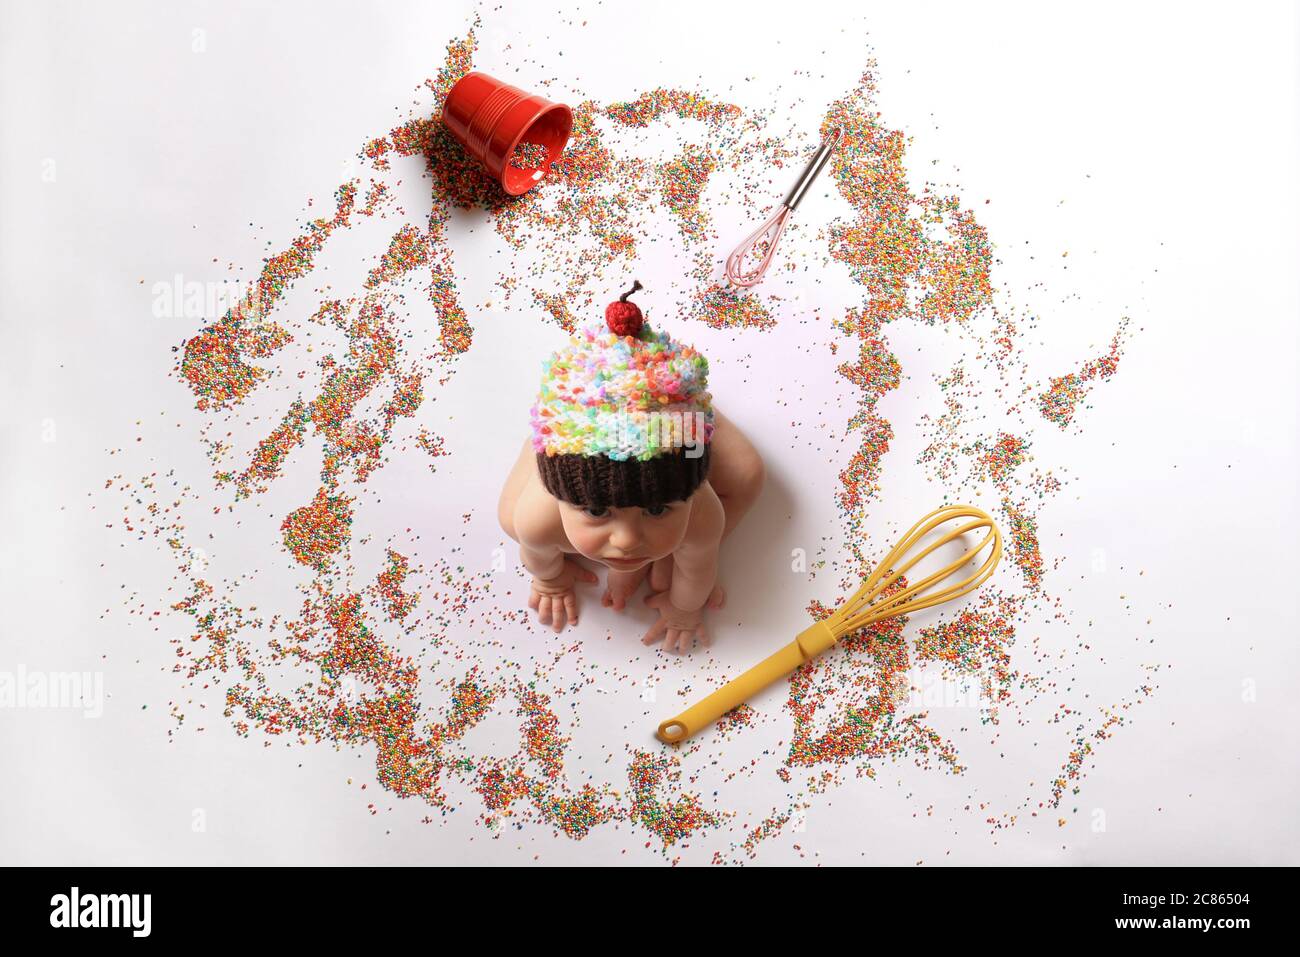 Baby wearing a cupcake hat among whiskers and sprinkles. Stock Photo